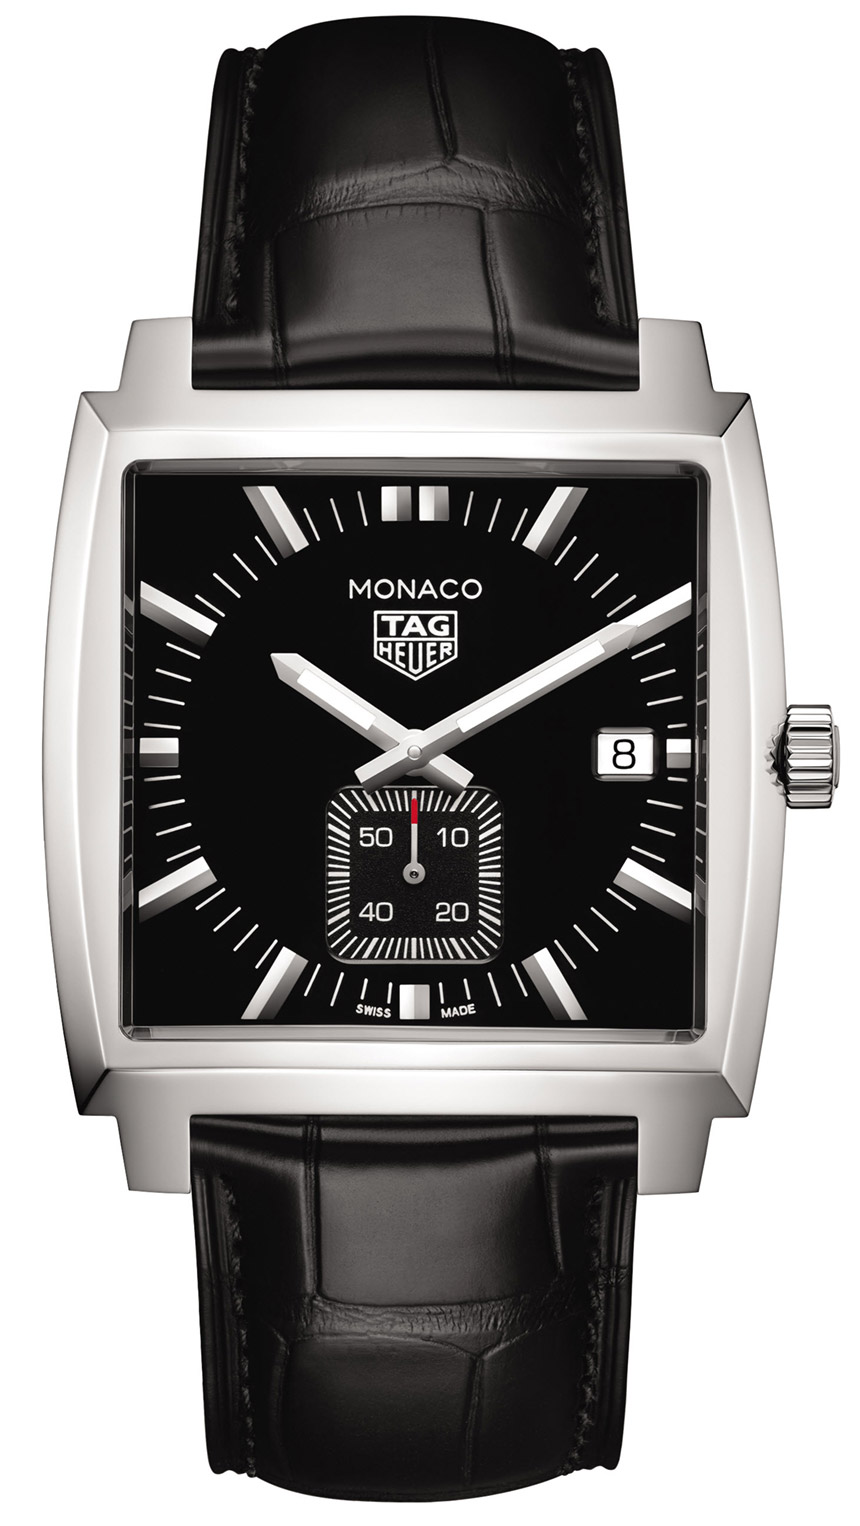 Tag Heuer's new smartwatch is ludicrously expensive